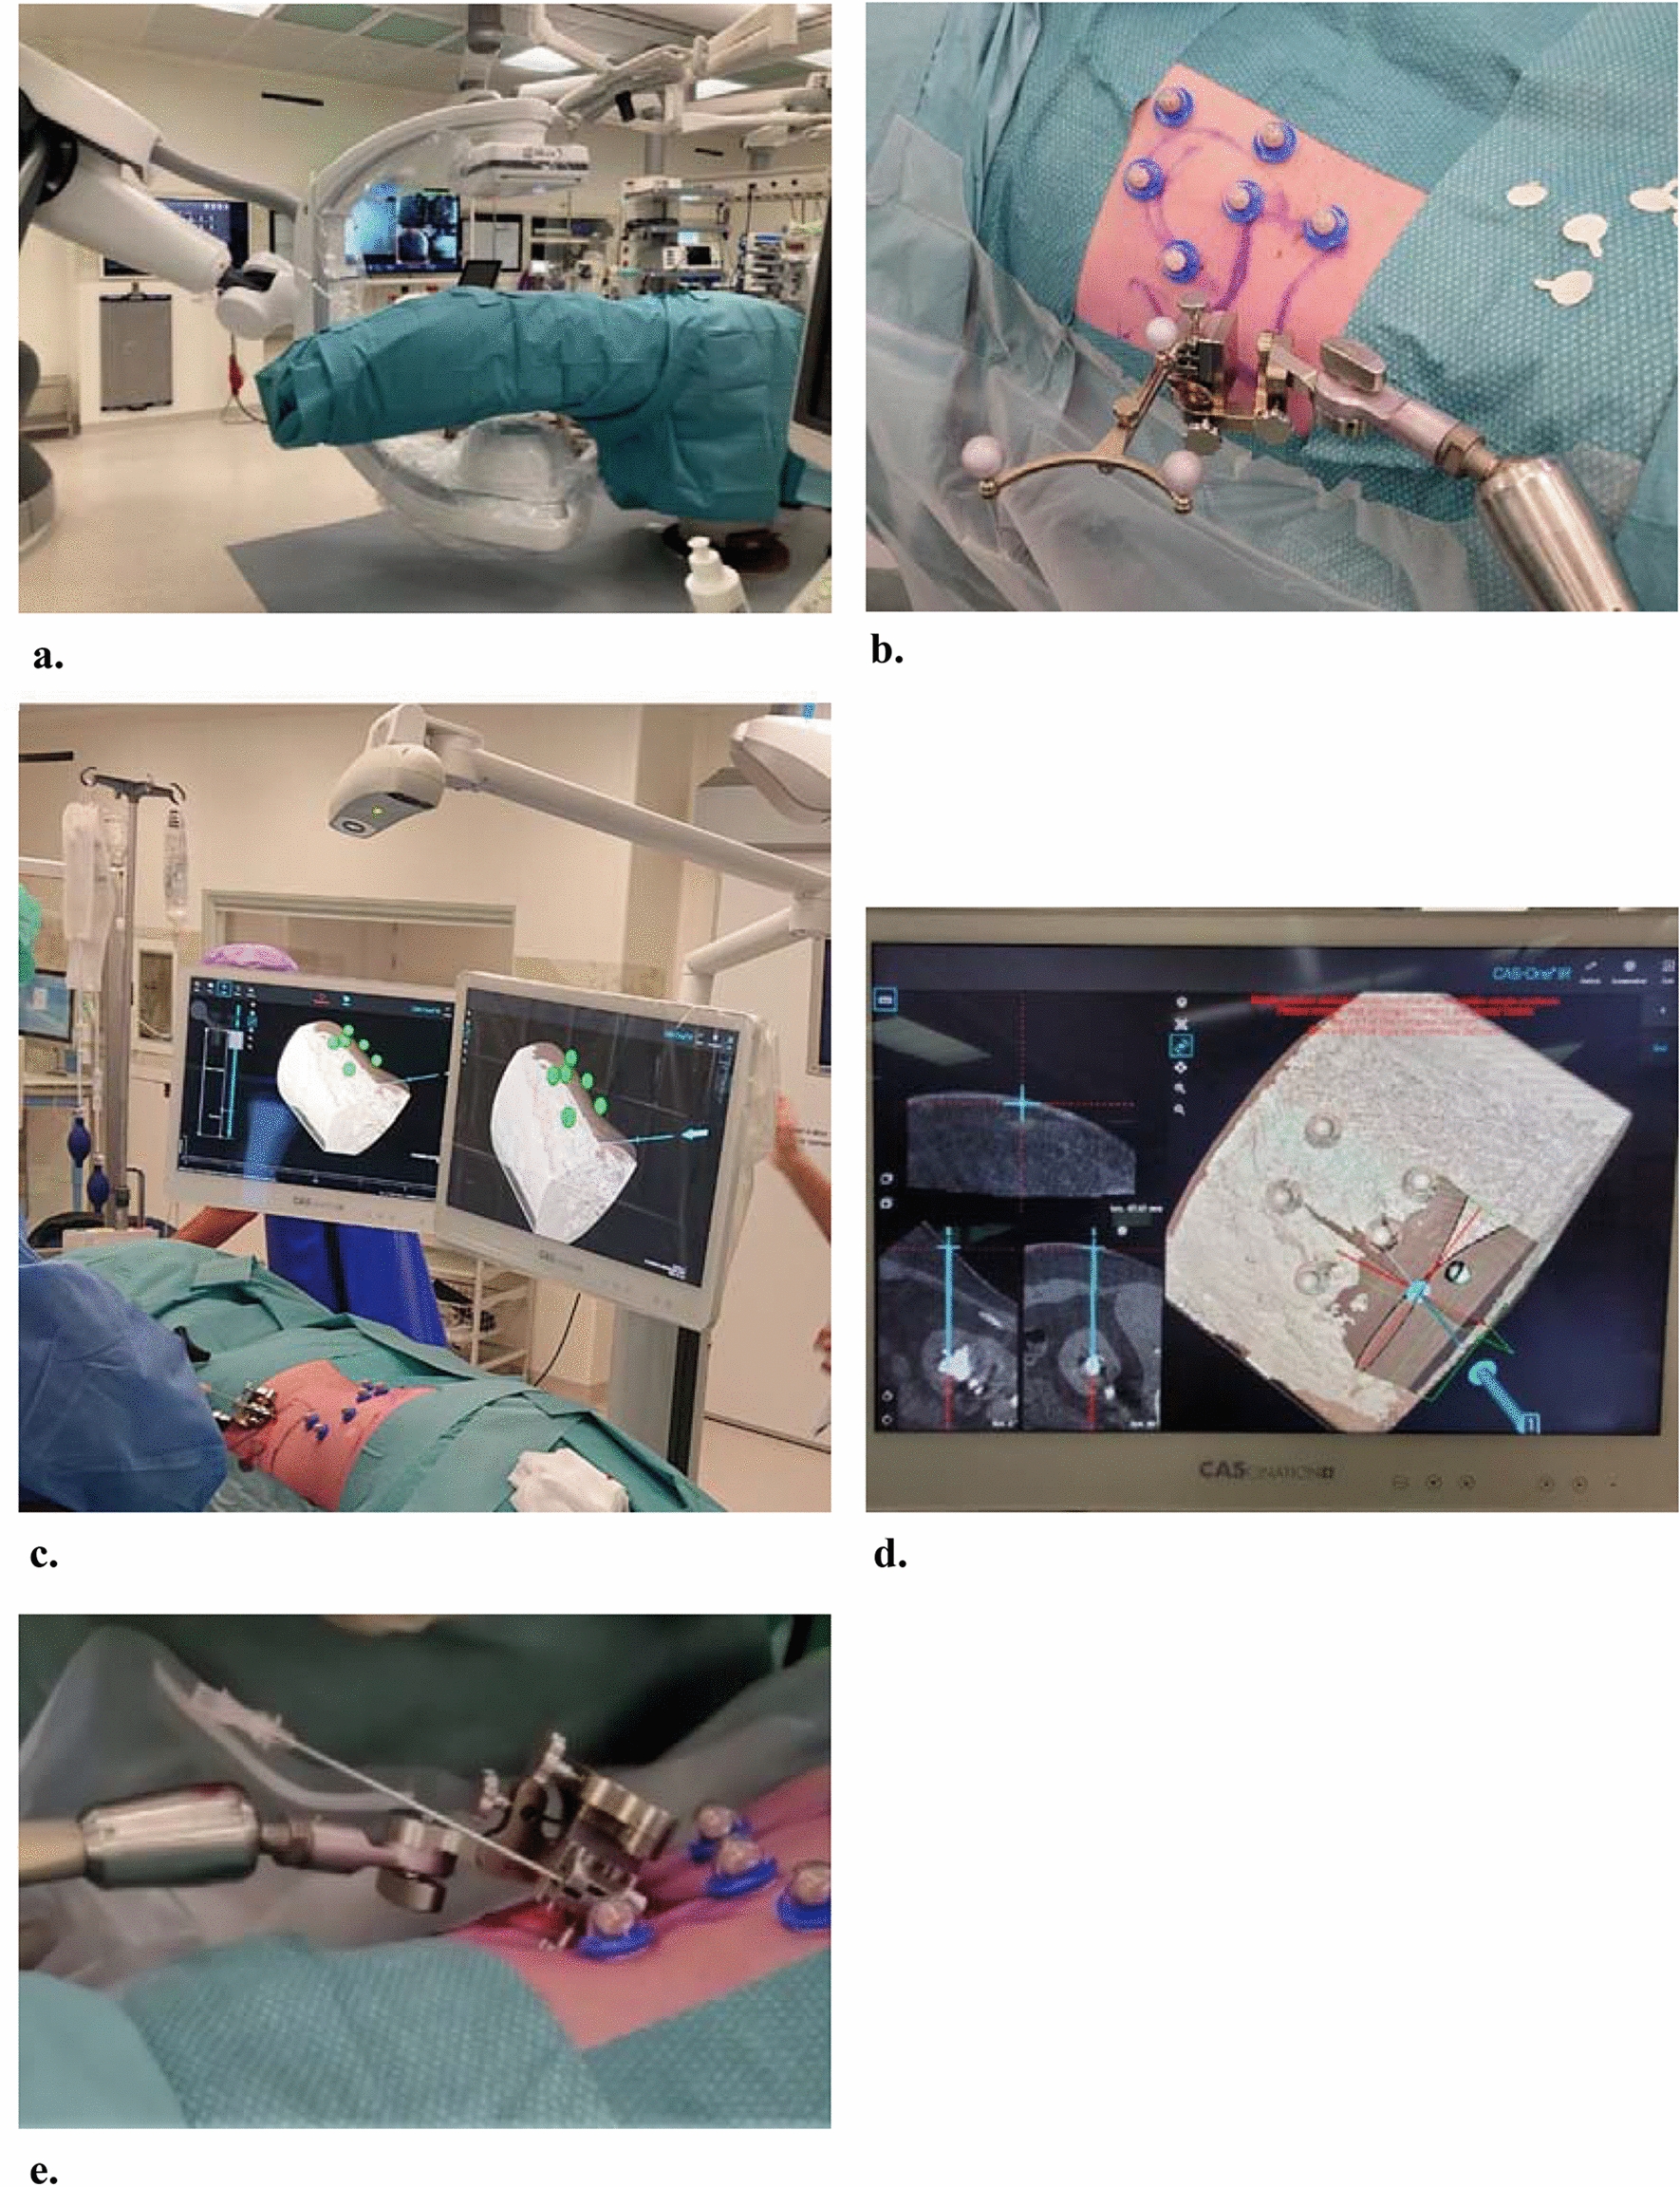 Feasibility of stereotactic optical navigation for needle positioning in percutaneous nephrolithotomy